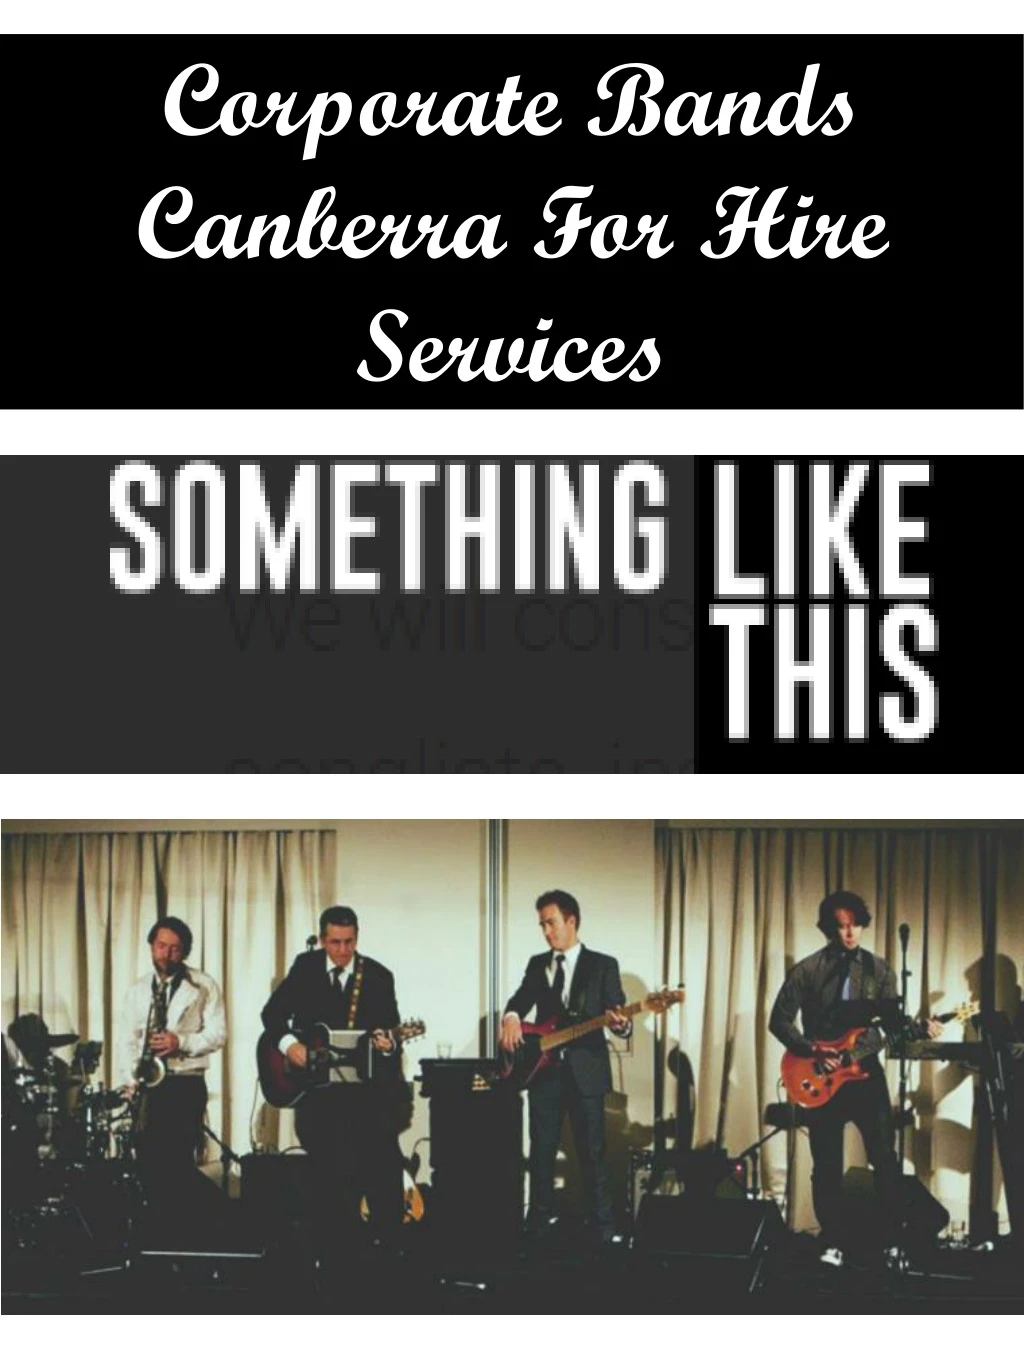 corporate bands canberra for hire services